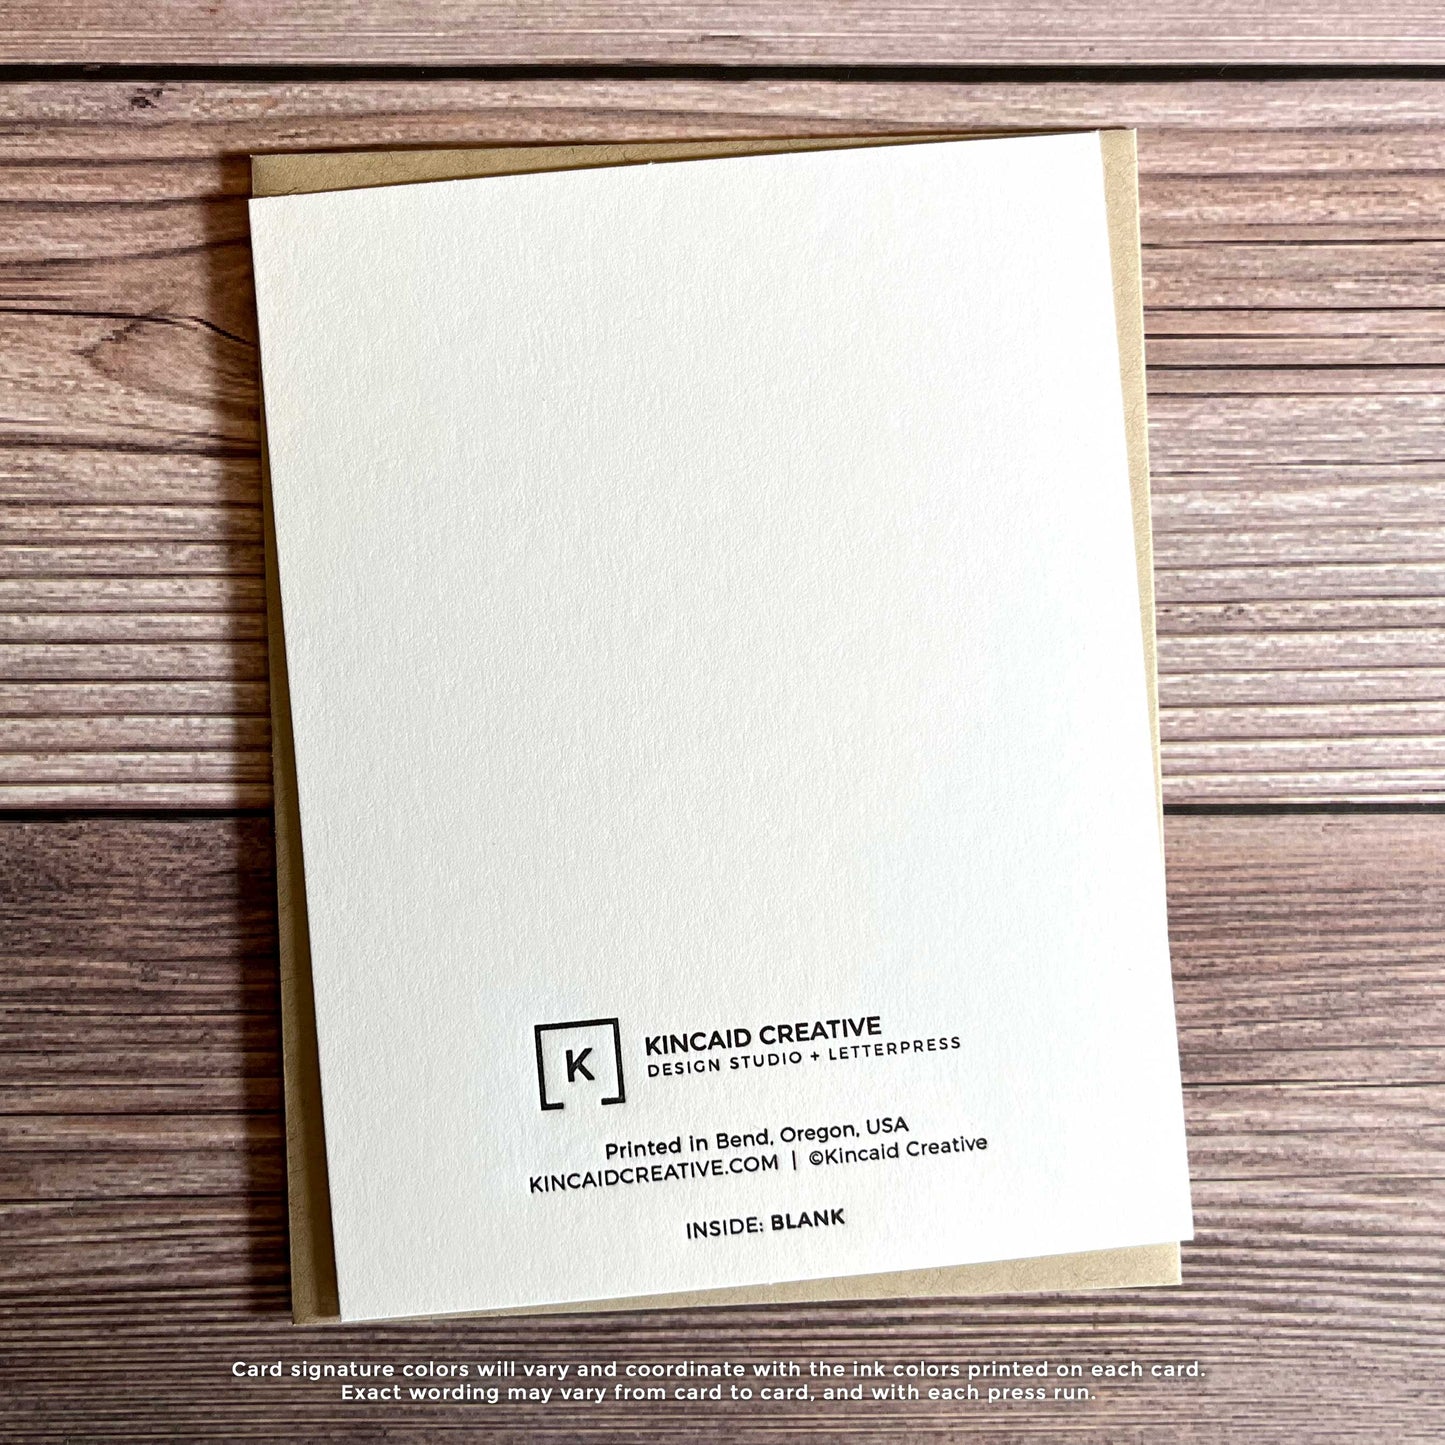 Letterpress greeting card, Father's Day card, blank inside, back view of card, Kincaid Creative Design and Letterpress Studio, Bend, Oregon